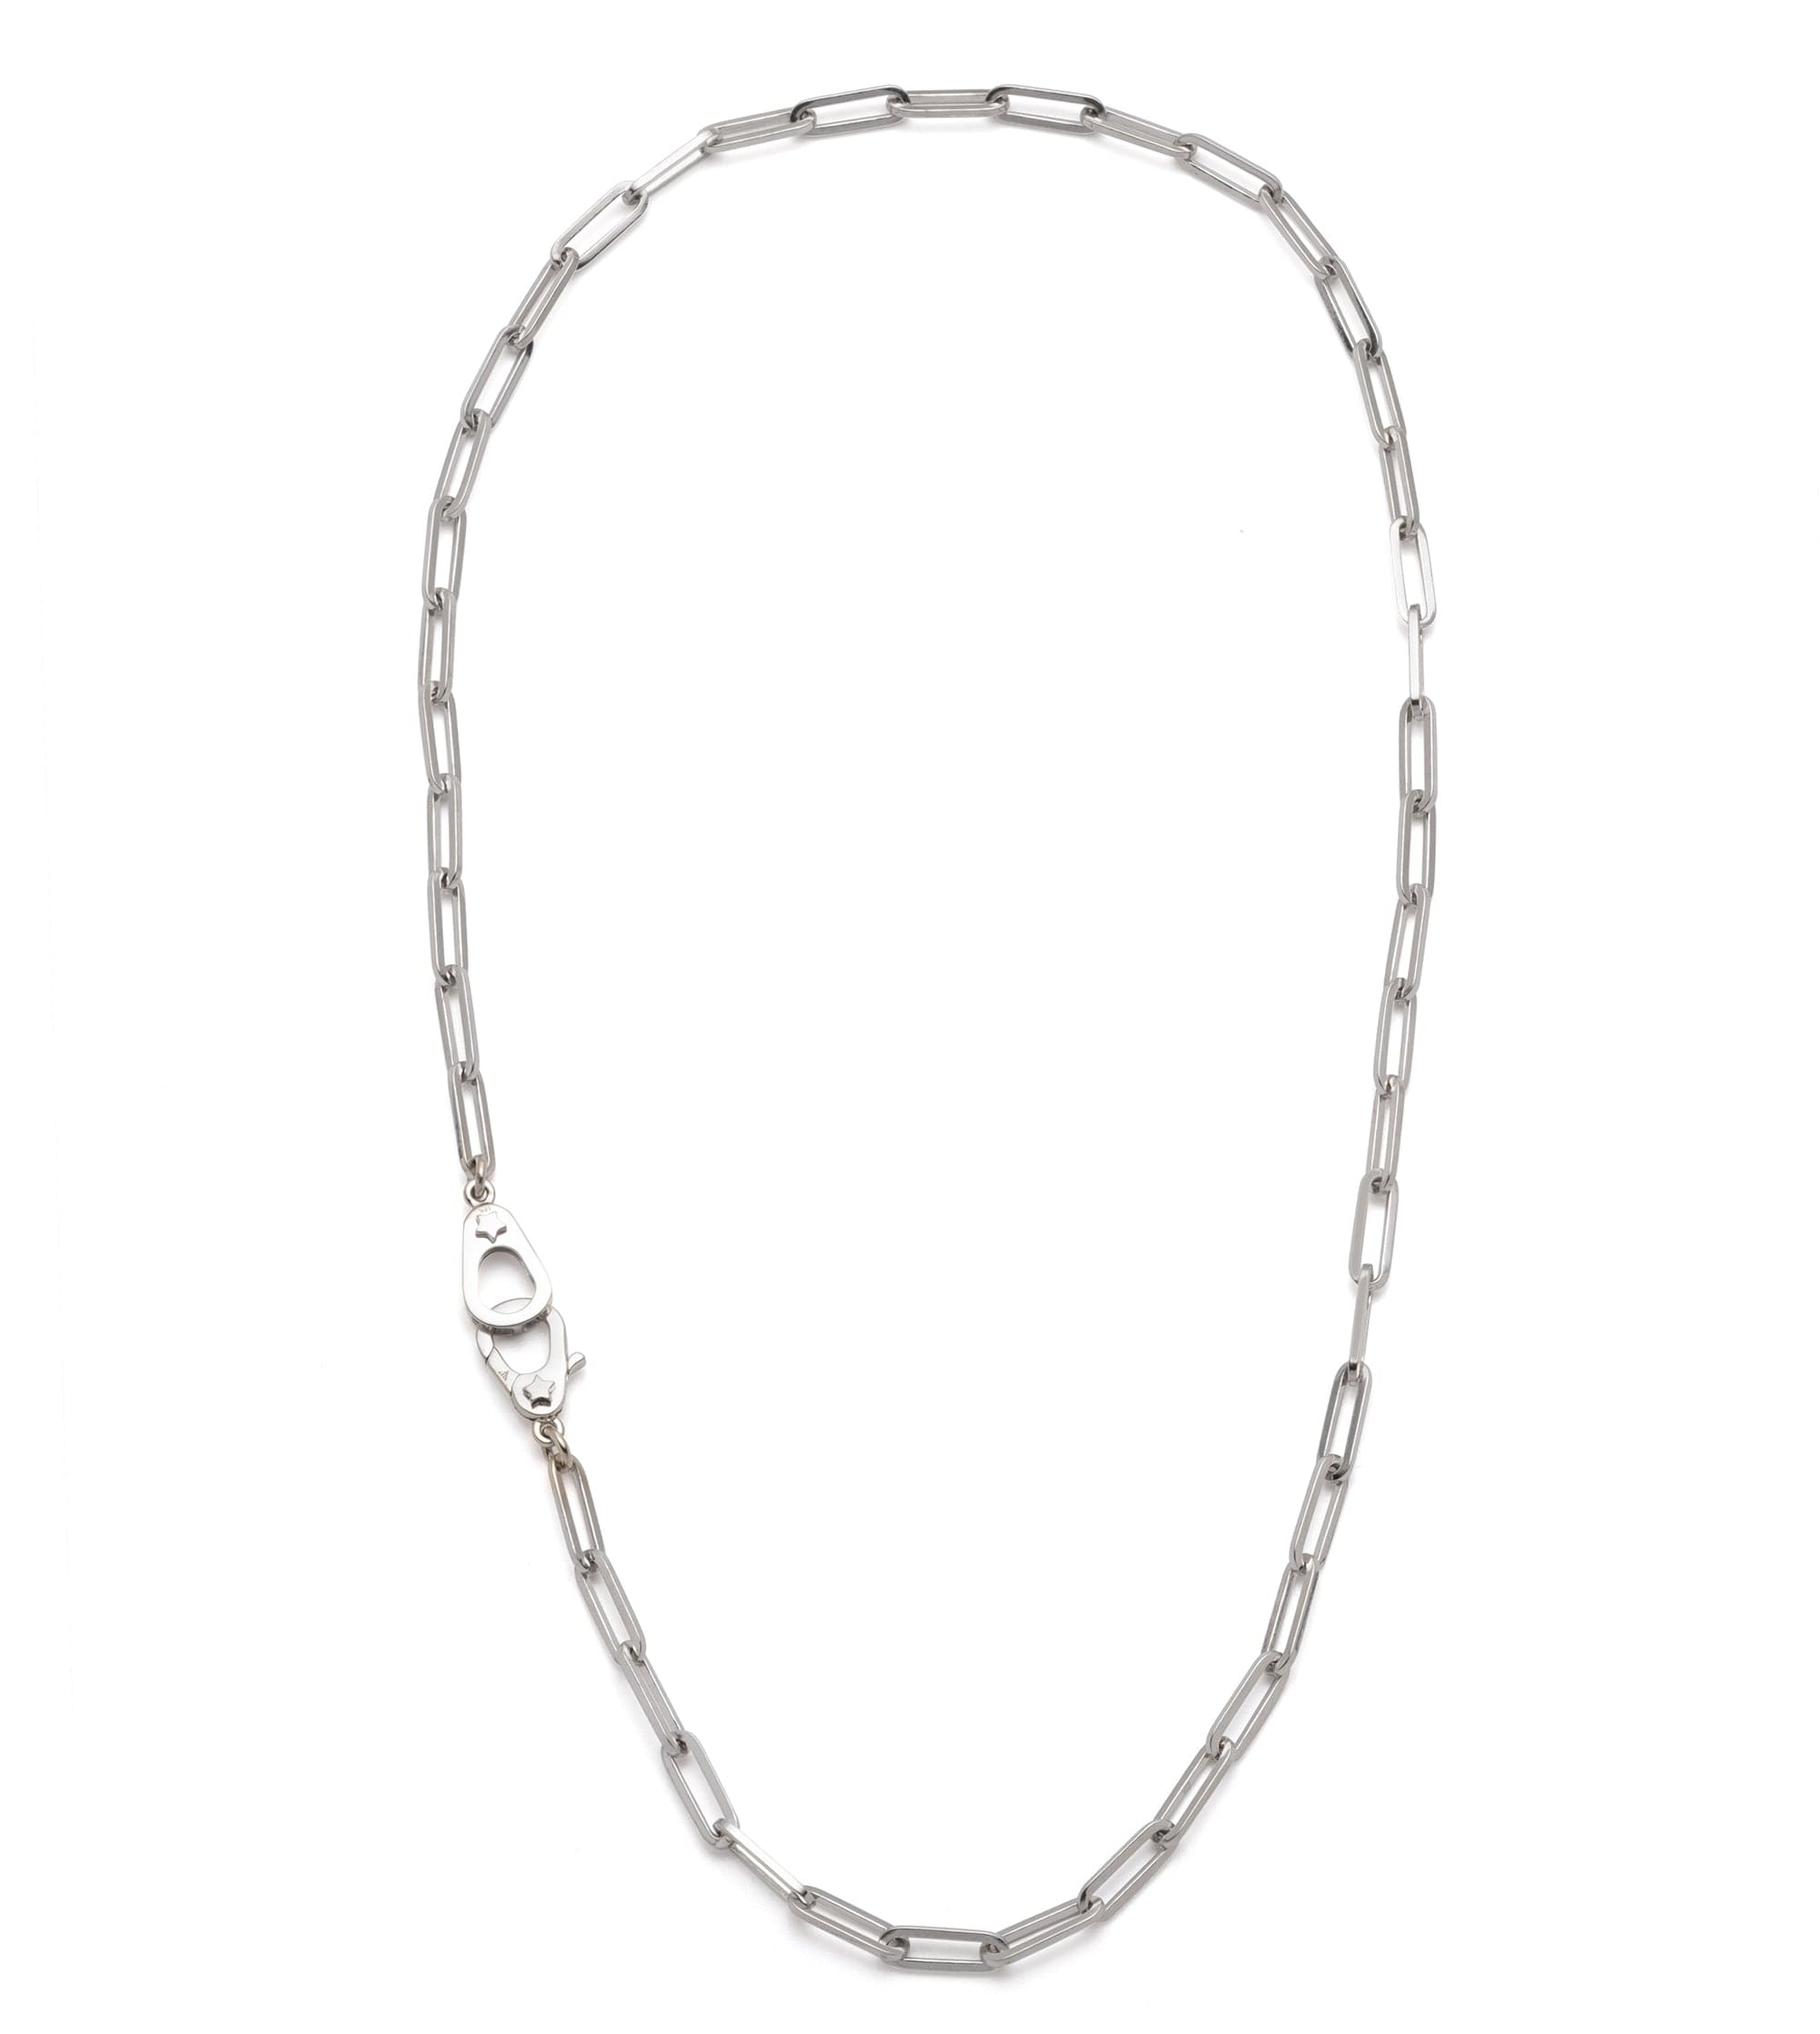 16" Sister Hook : Classic Fob Clip Chain